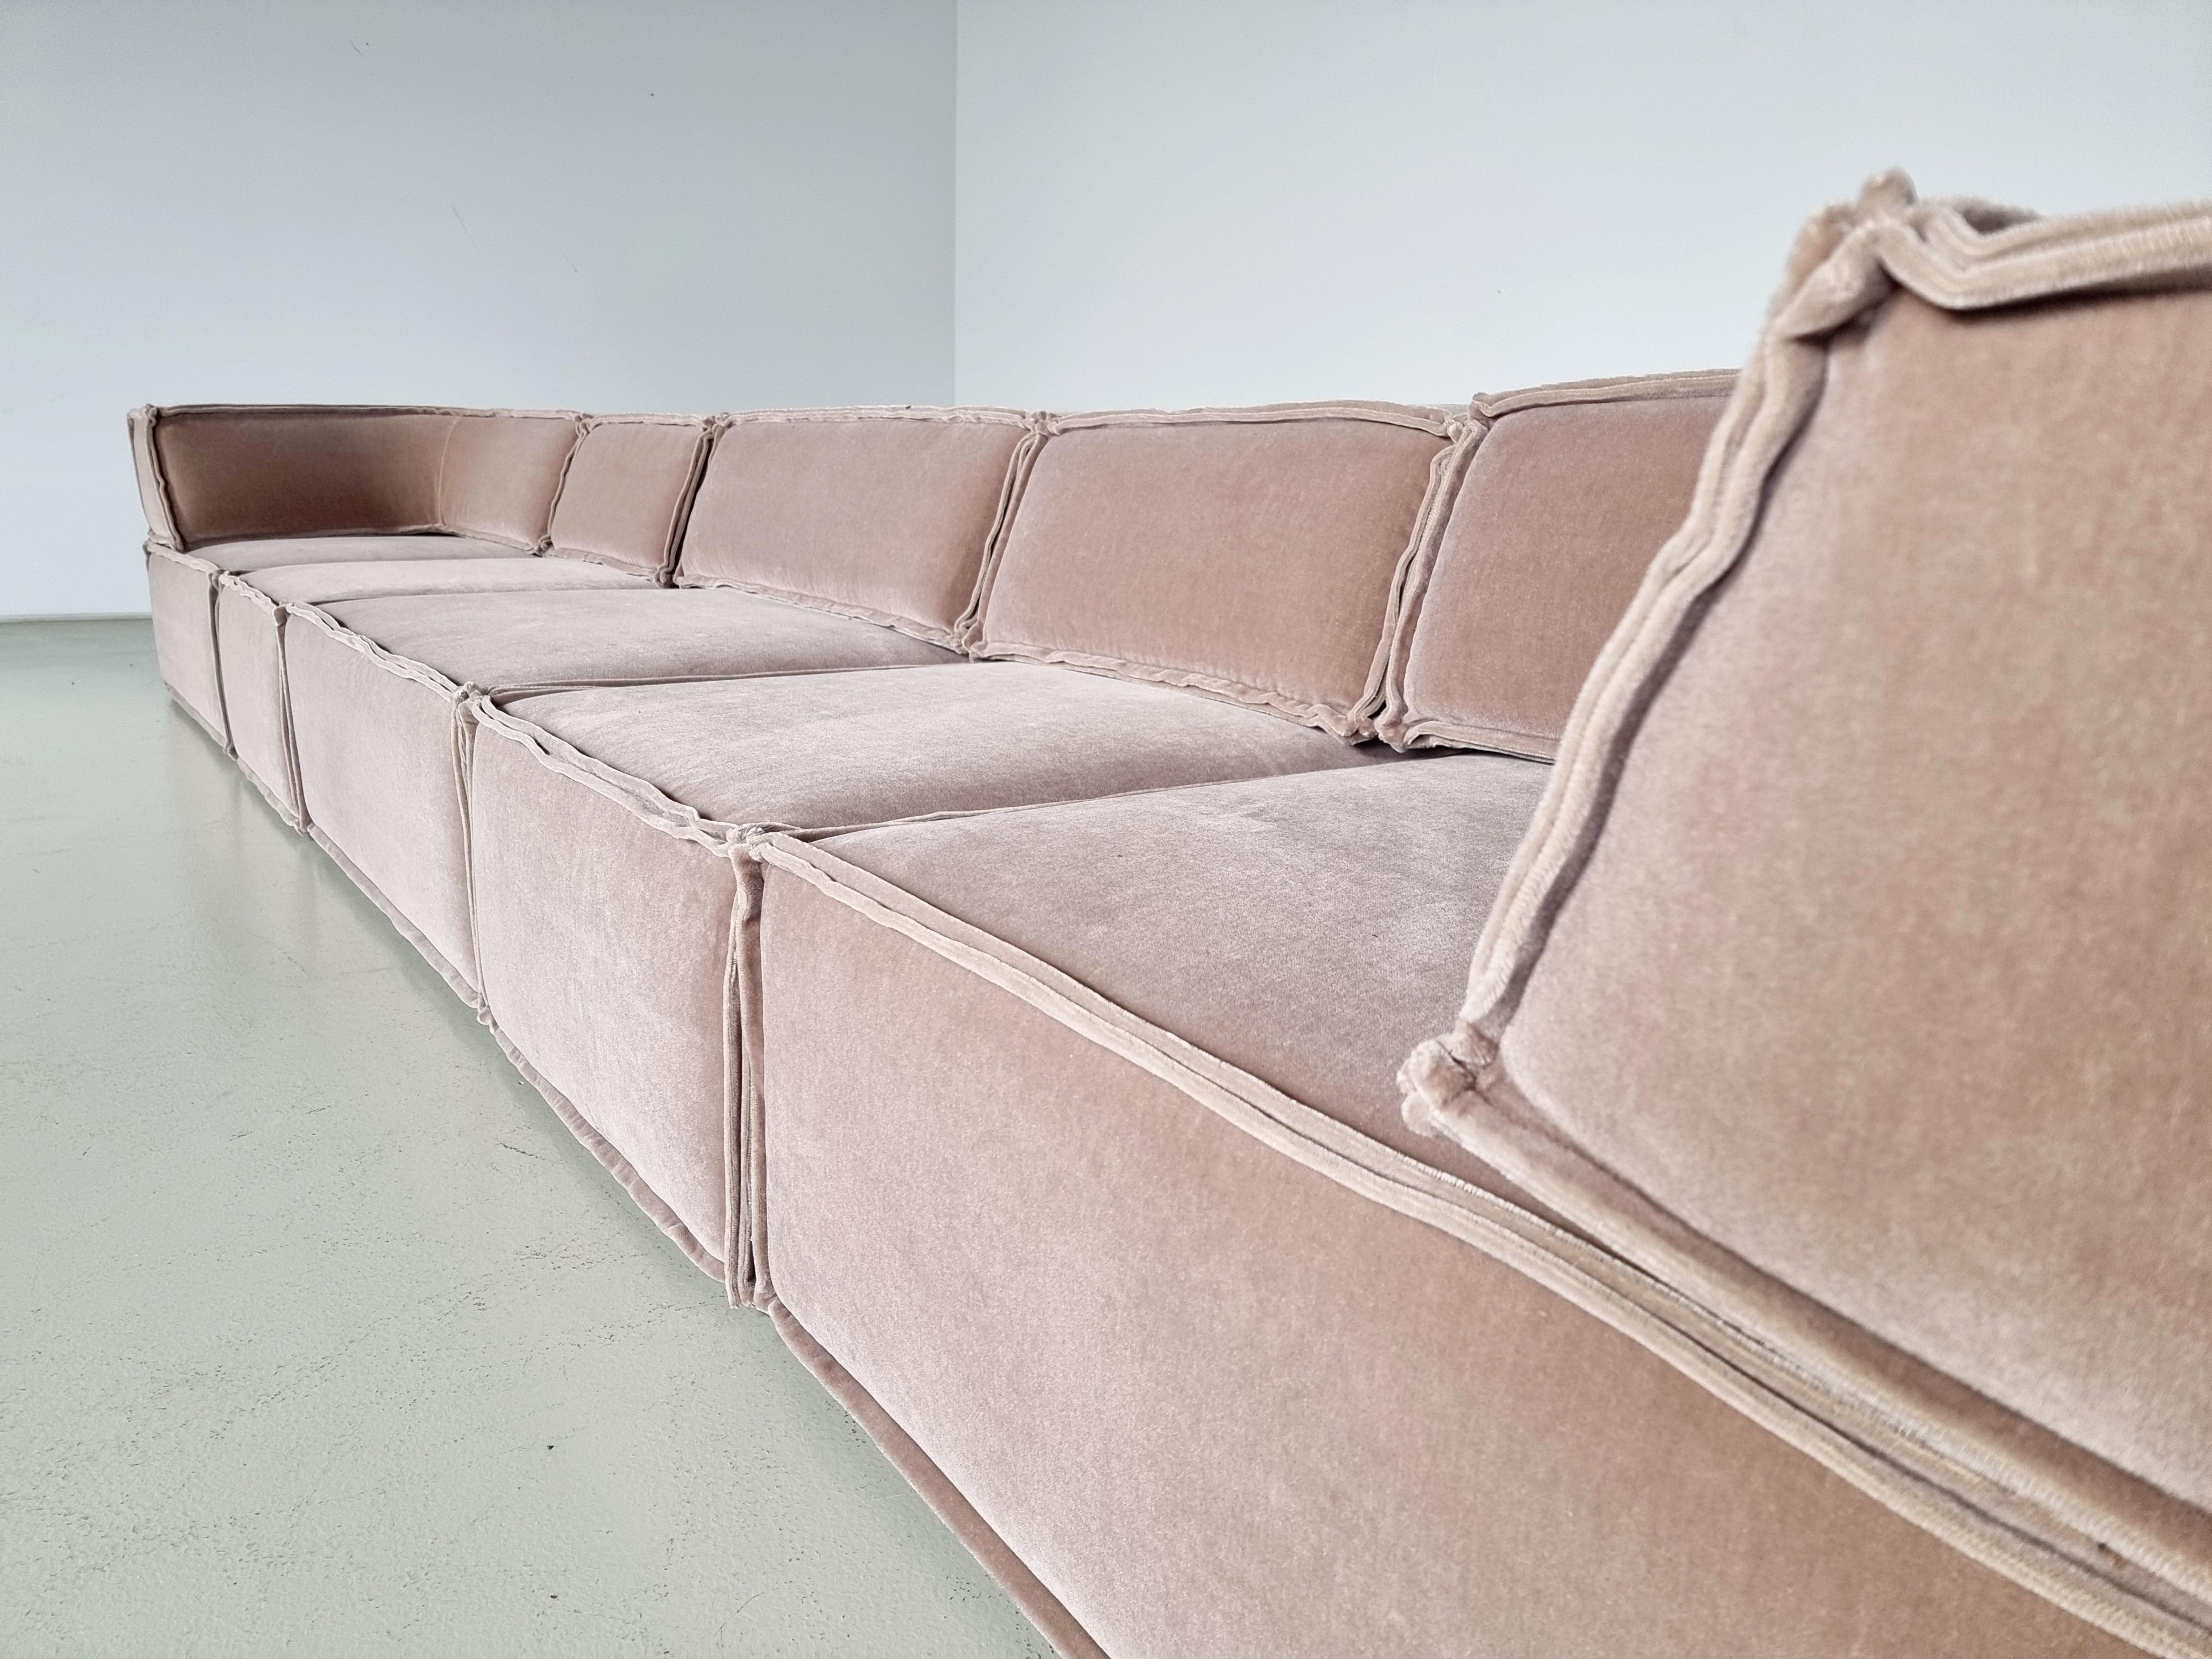 COR Trio Sofa by Team Form Ag for COR Furniture, Germany, 1970s For Sale 6